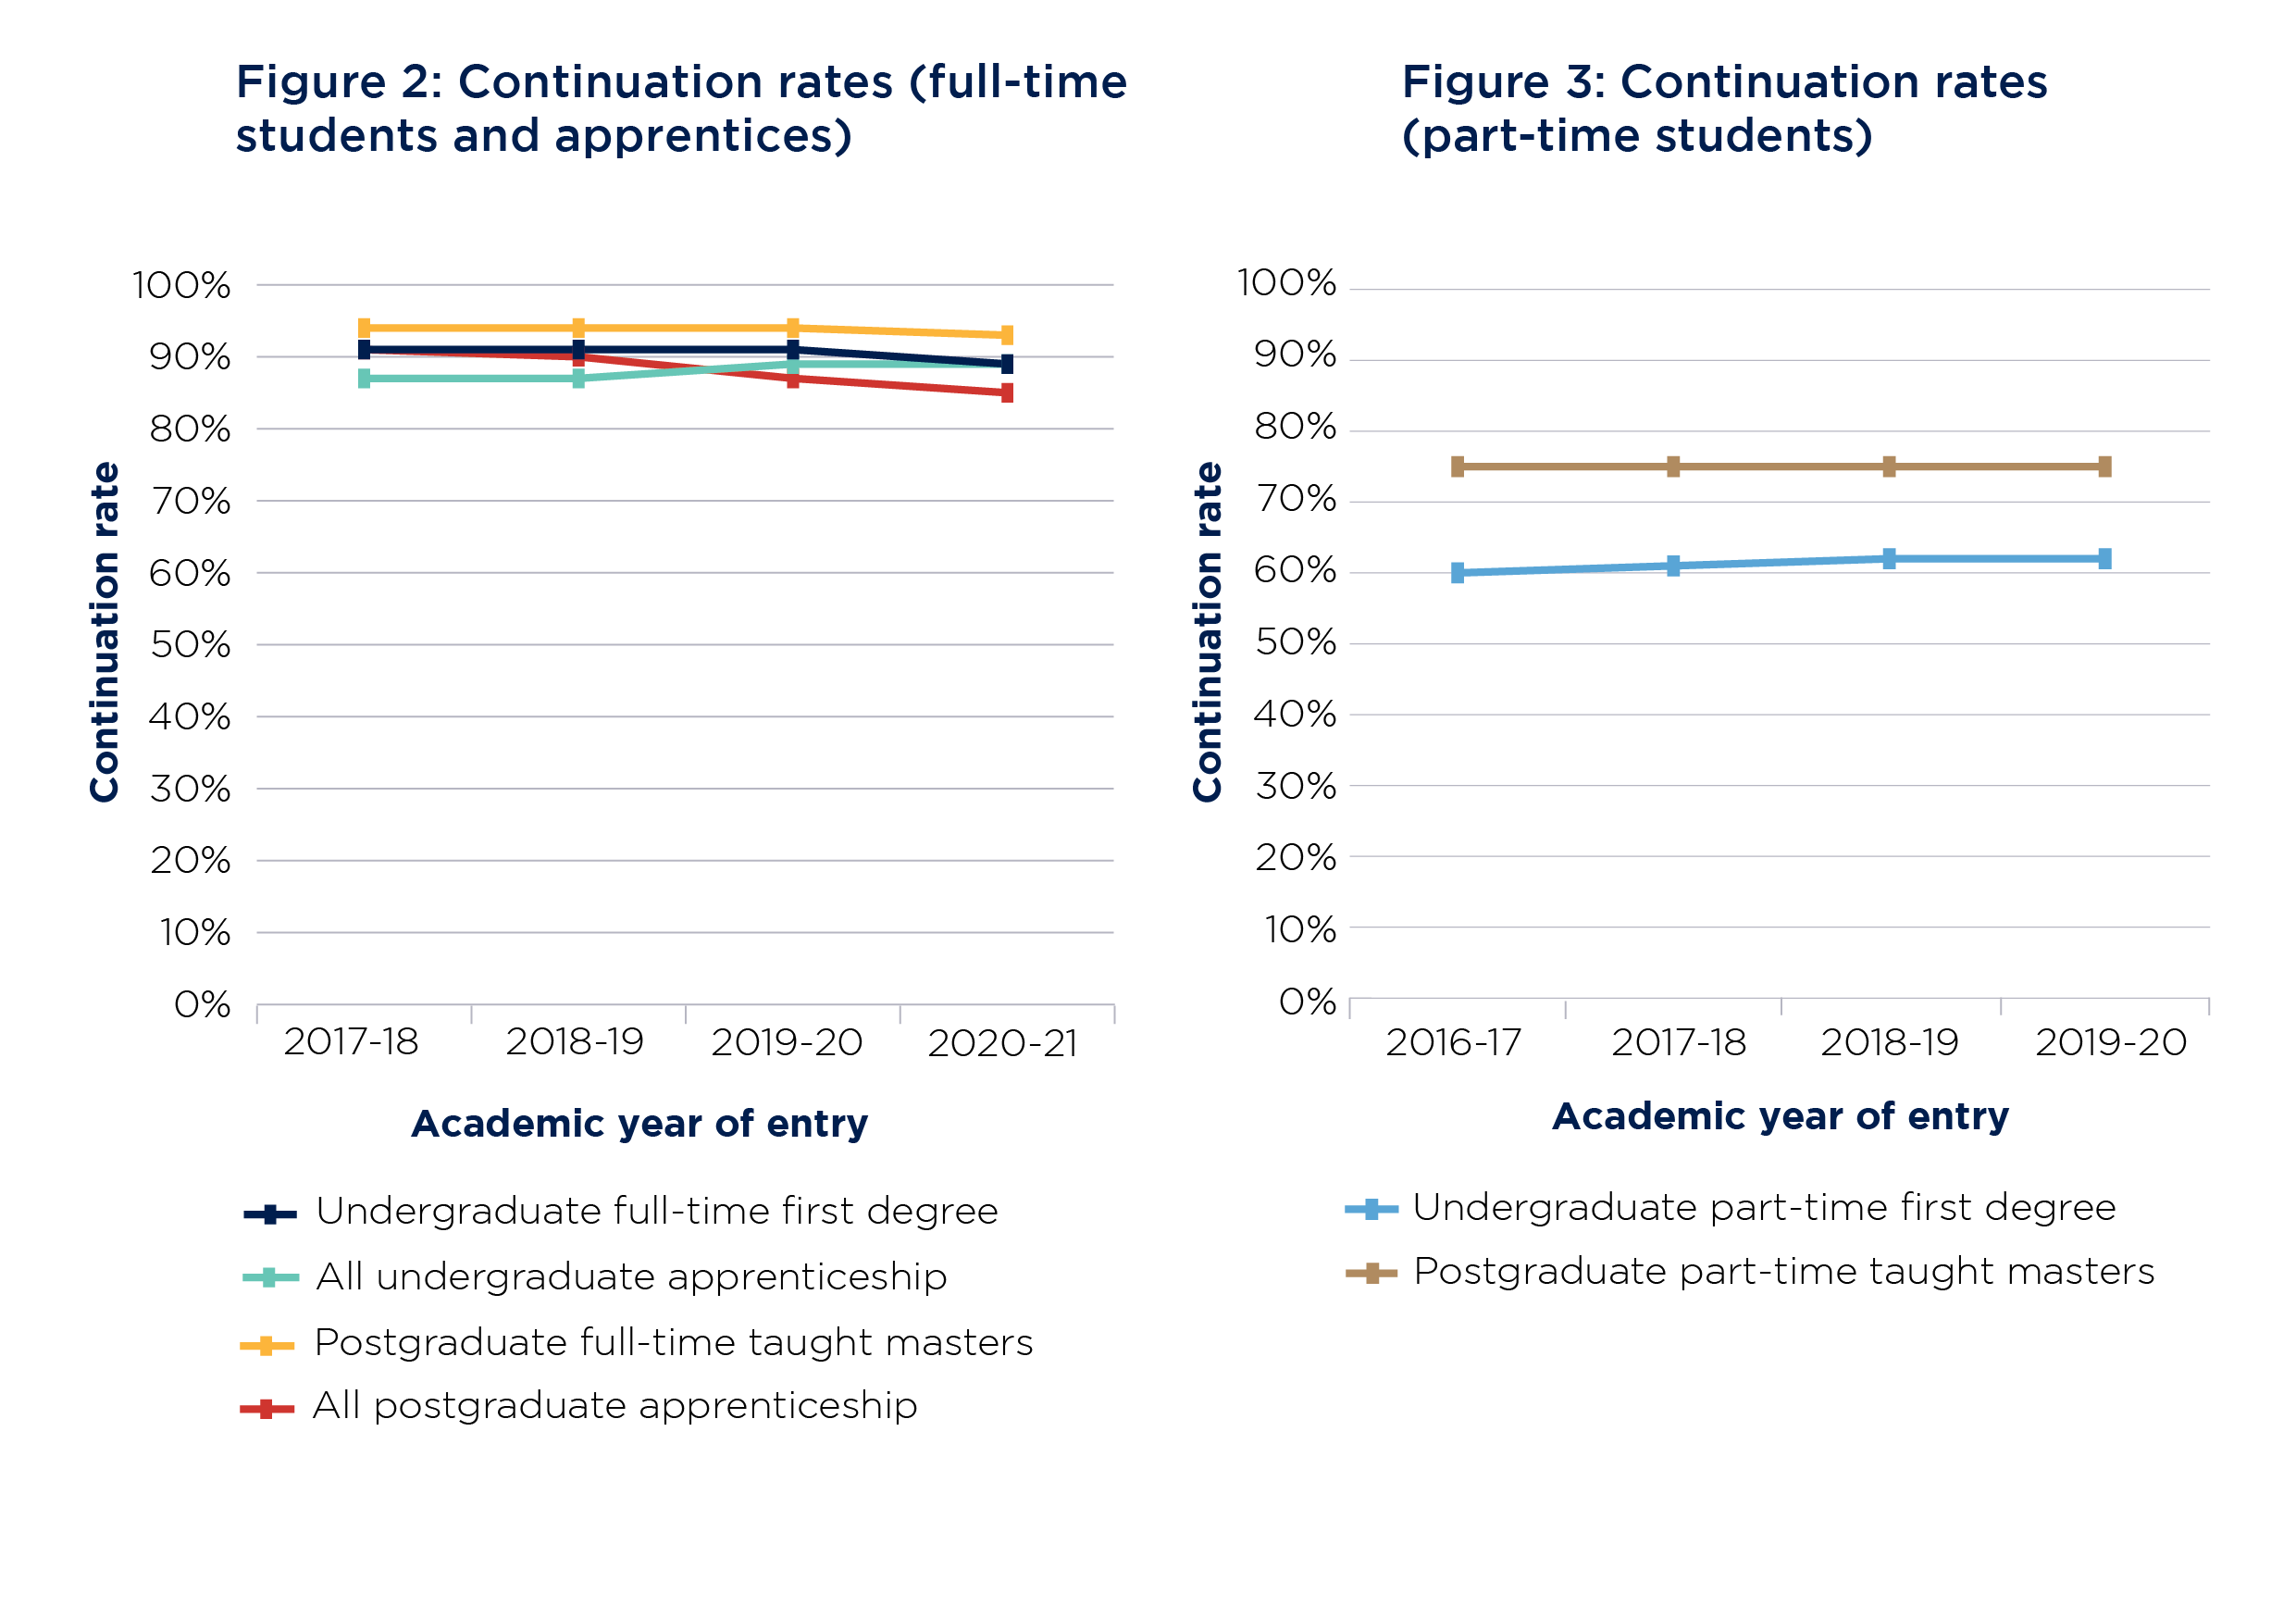 Figure 2 is a quadruple line graph showing continuation rates as a percentage for the years of entry 2017-18 to 2020-21 for the following groups of students: undergraduate full-time first degree, all undergraduate apprenticeship, postgraduate full-time taught masters, and all postgraduate apprenticeship. The rates for all undergraduate apprenticeships have risen slightly from 2018-19, while those for all the other groups have fallen slightly, most clearly in the case of all postgraduate apprenticeships. Figure 3 is a double line graph showing continuation rates as a percentage for the years of entry 2016-17 to 2019-20 for the following groups of students: undergraduate part-time first degree and postgraduate part-time taught masters. Both have remained roughly similar over time, with slight growth in the rates for undergraduate part-time first degree students. Both rates, however, are significantly lower overall than those for full-time students shown in Figure 2.